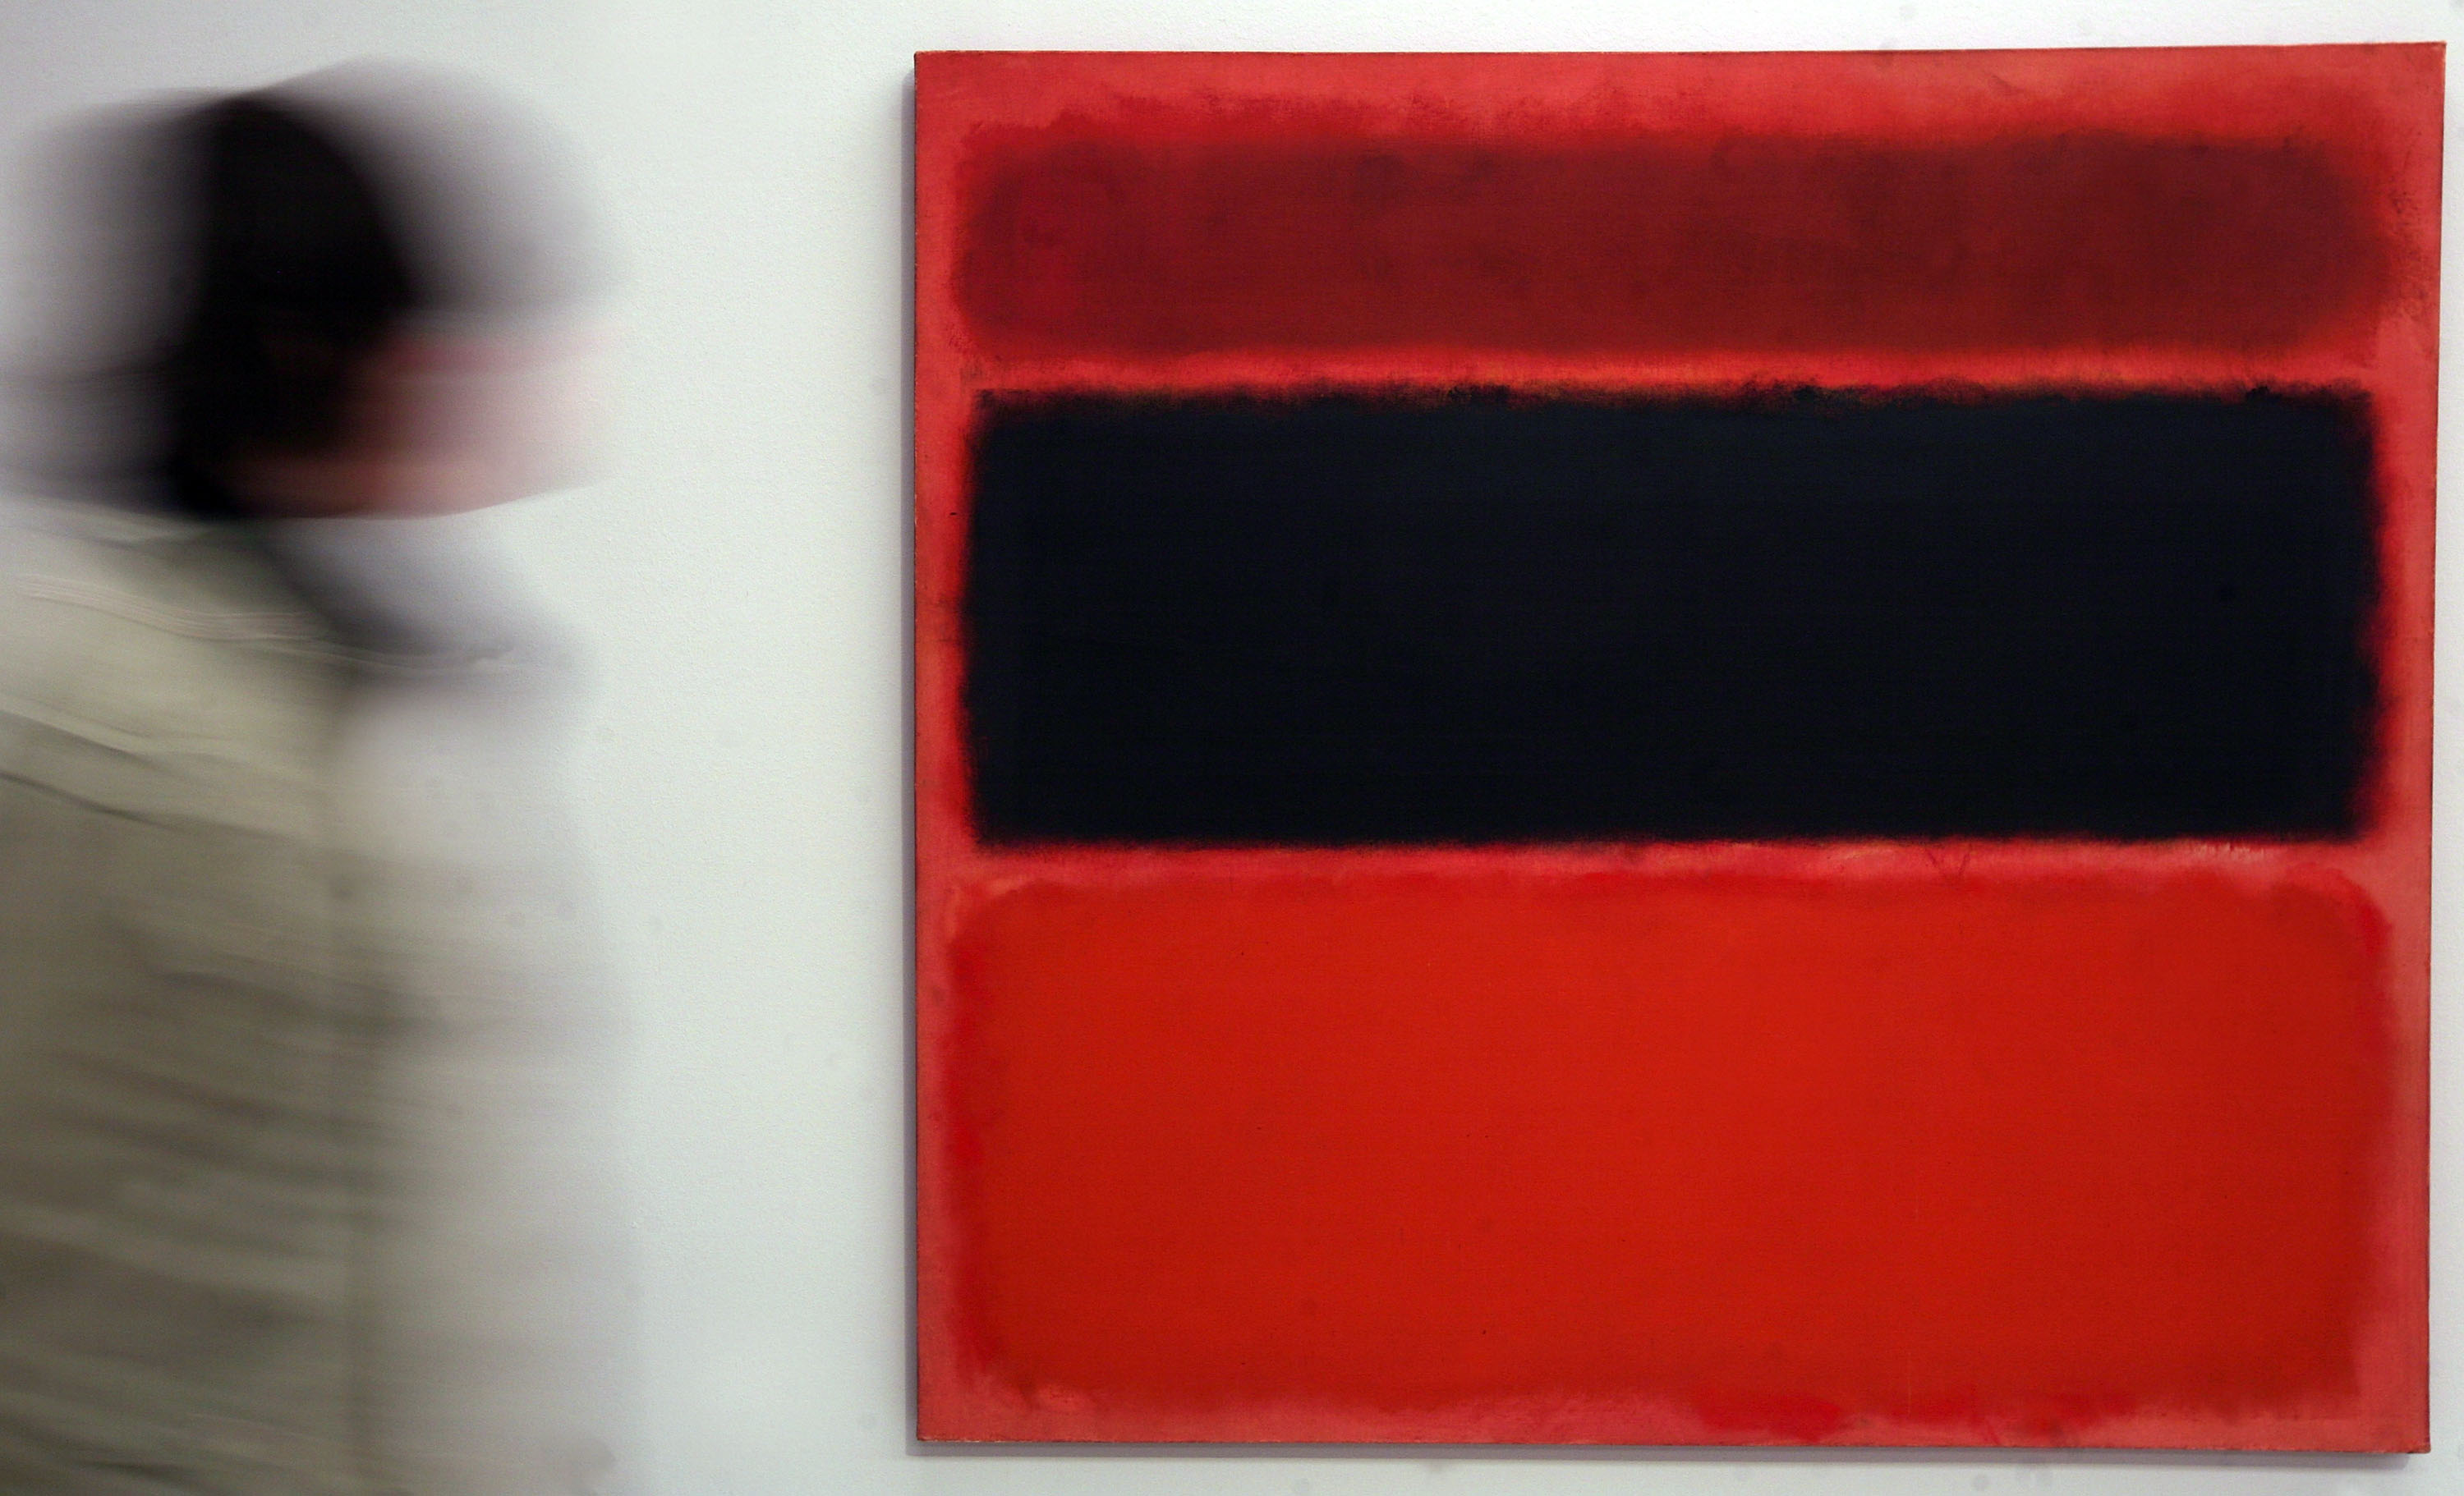 A Mark Rothko painting, featuring his signature planes of color, on display in Munich's Kunsthalle in 2008.